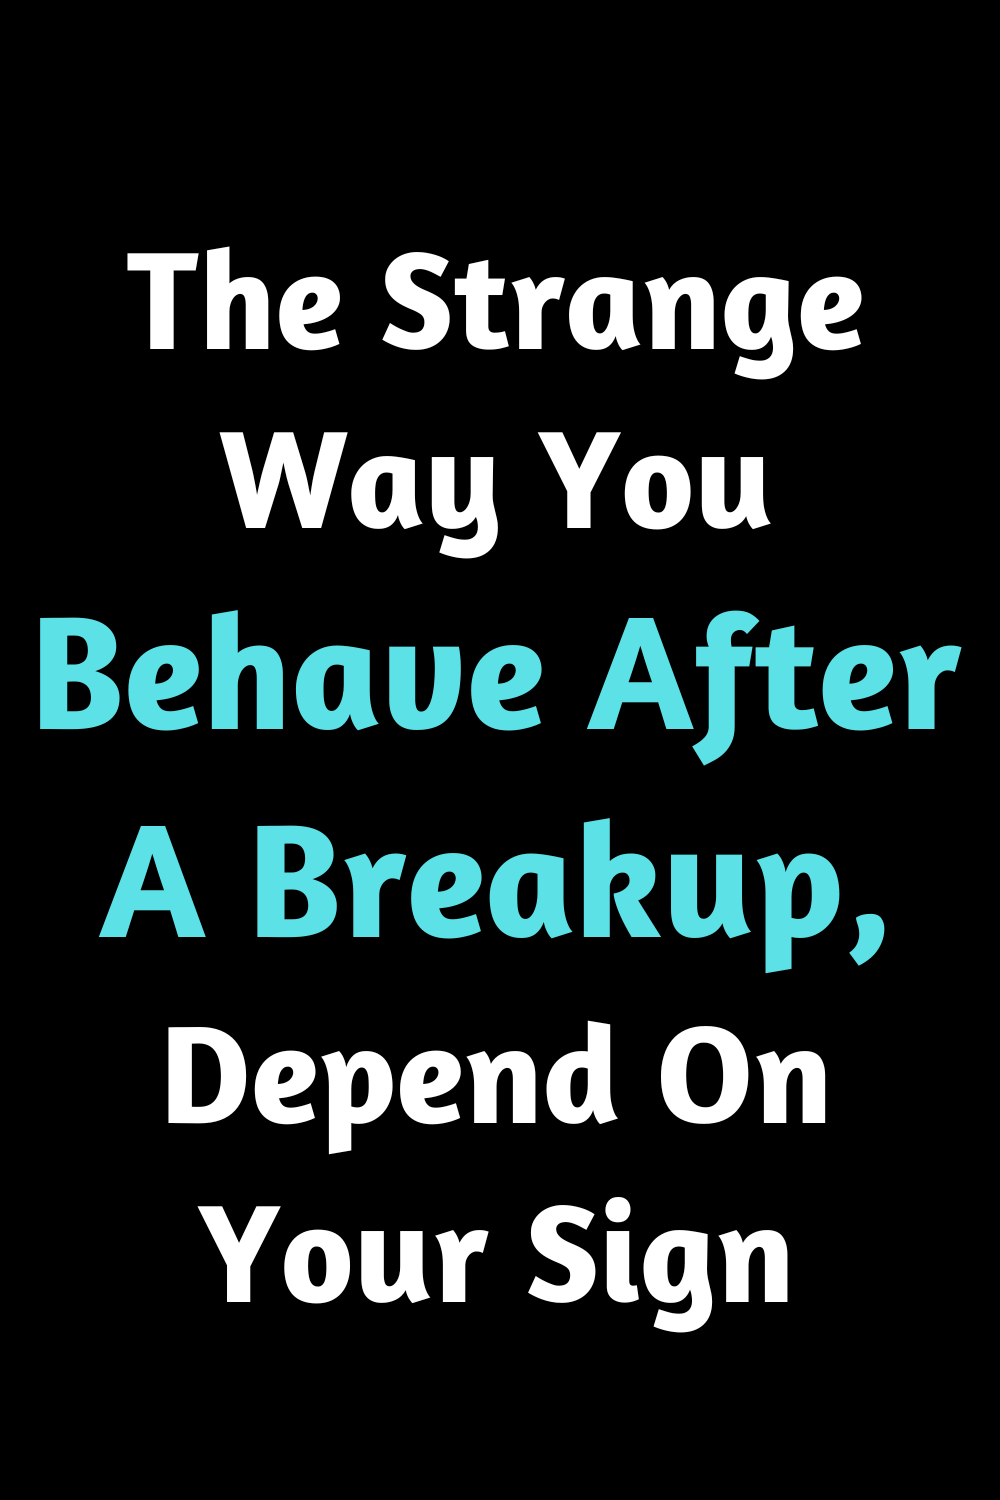 The Strange Way You Behave After A Breakup, Depend On Your Sign